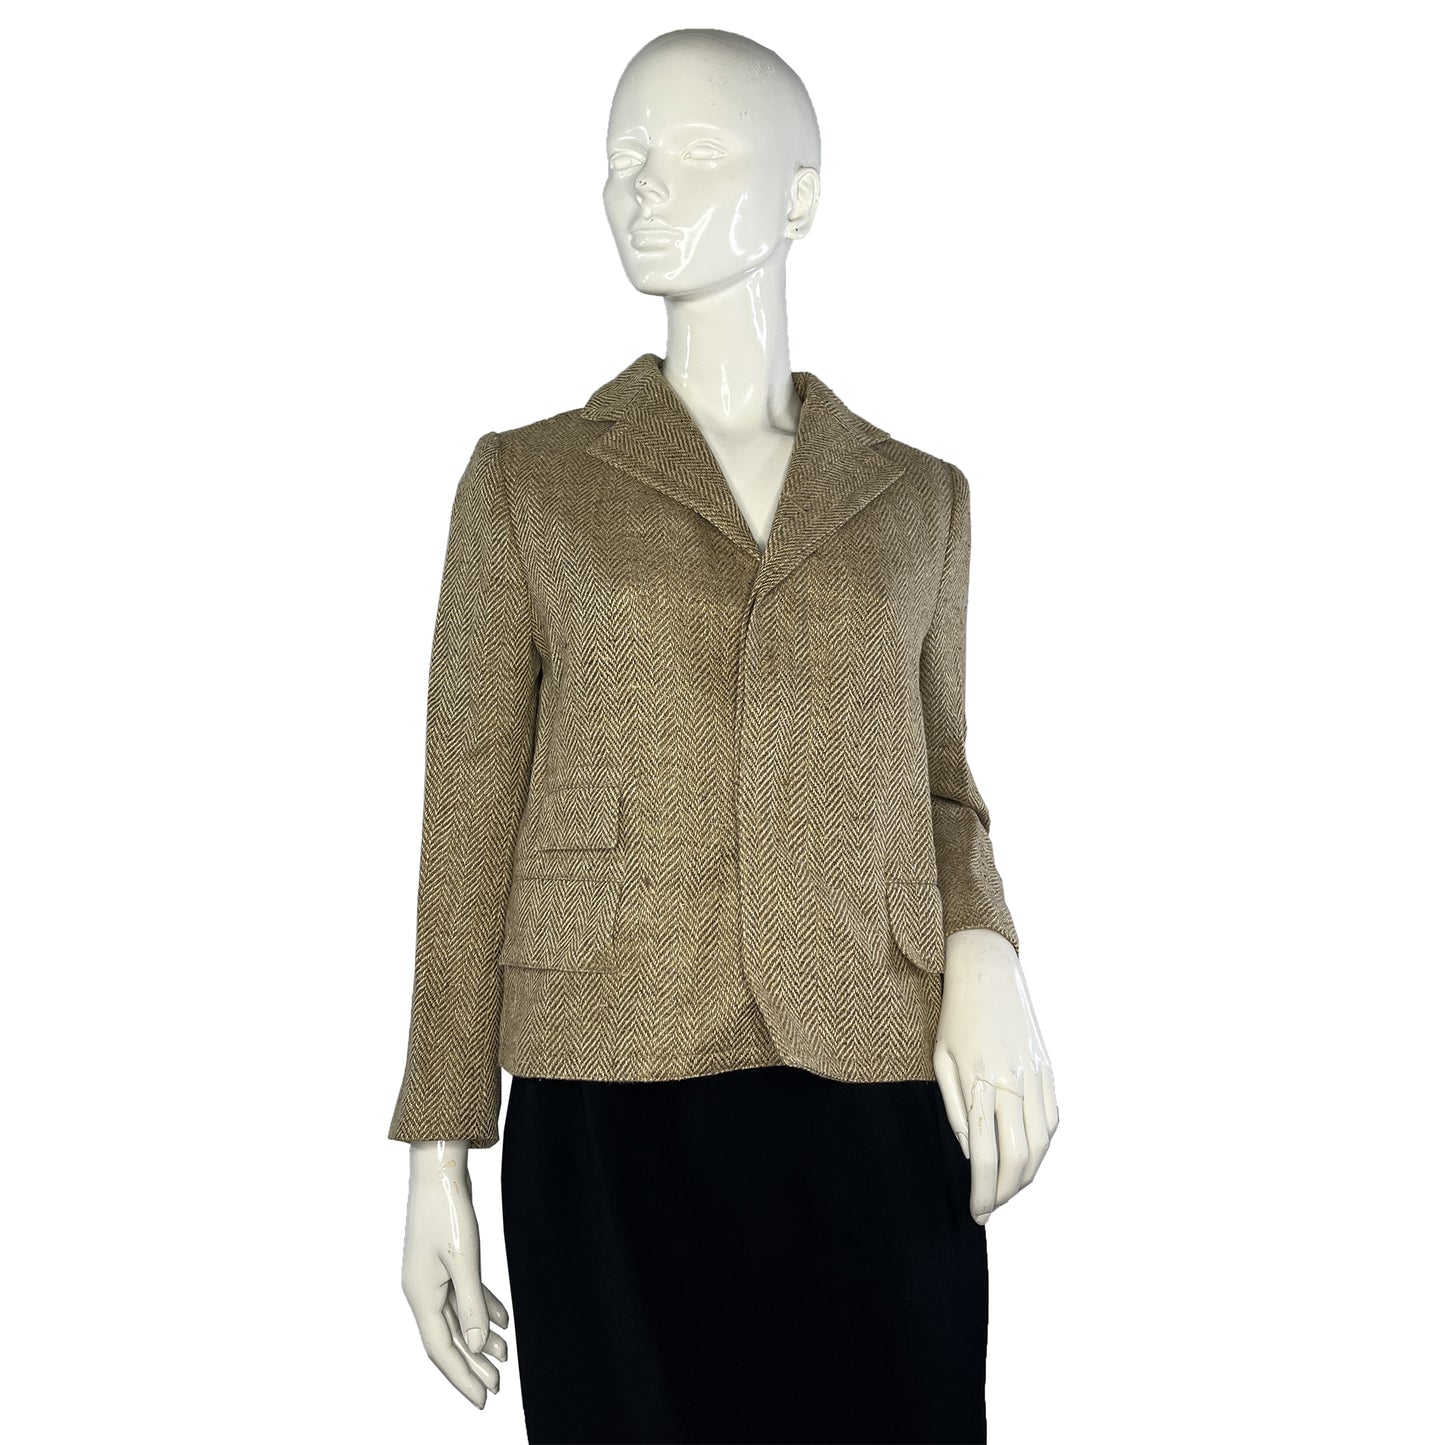 Banana Republic Women's Navy Blazer with Logan Suit Pants - Size 8 NWT -  clothing & accessories - by owner - apparel